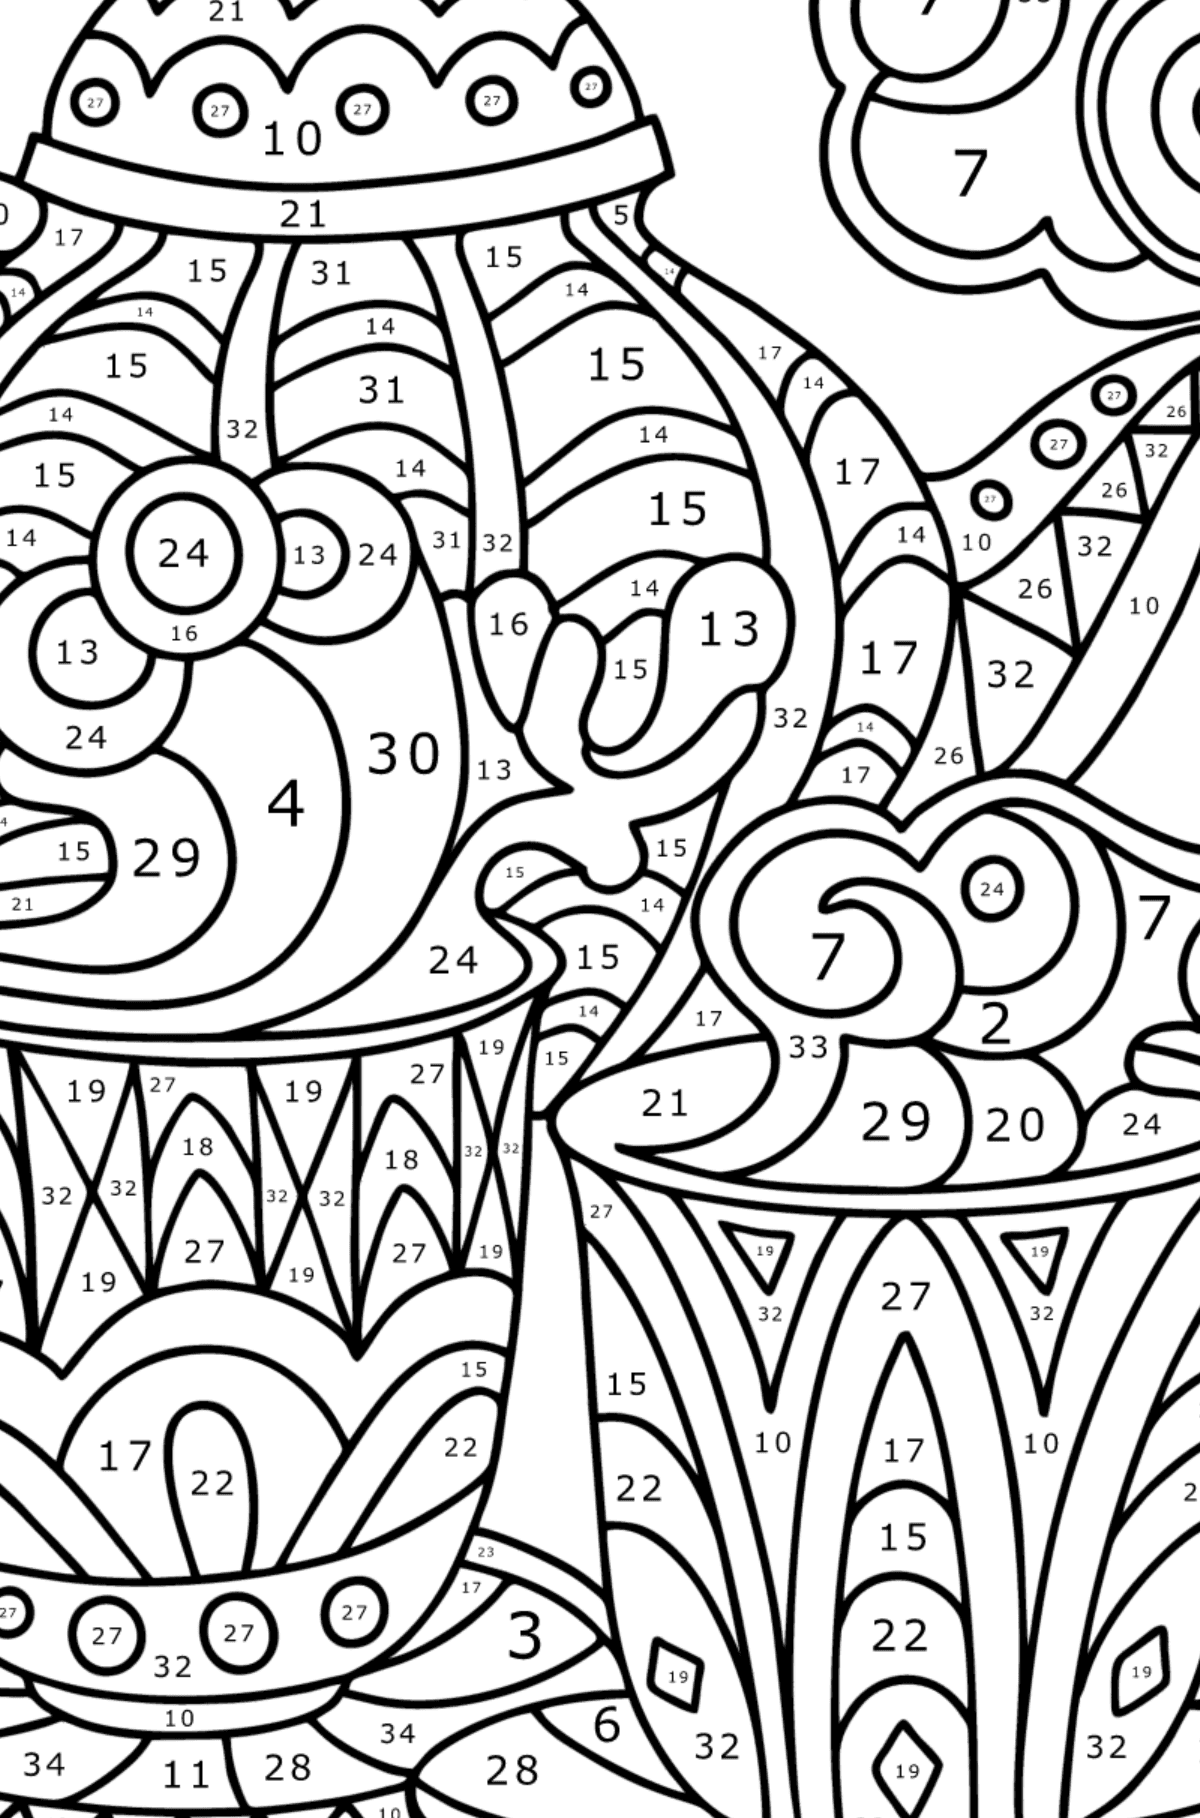 Doodle Coloring Page for Kids - Tea Party - Coloring by Numbers for Kids